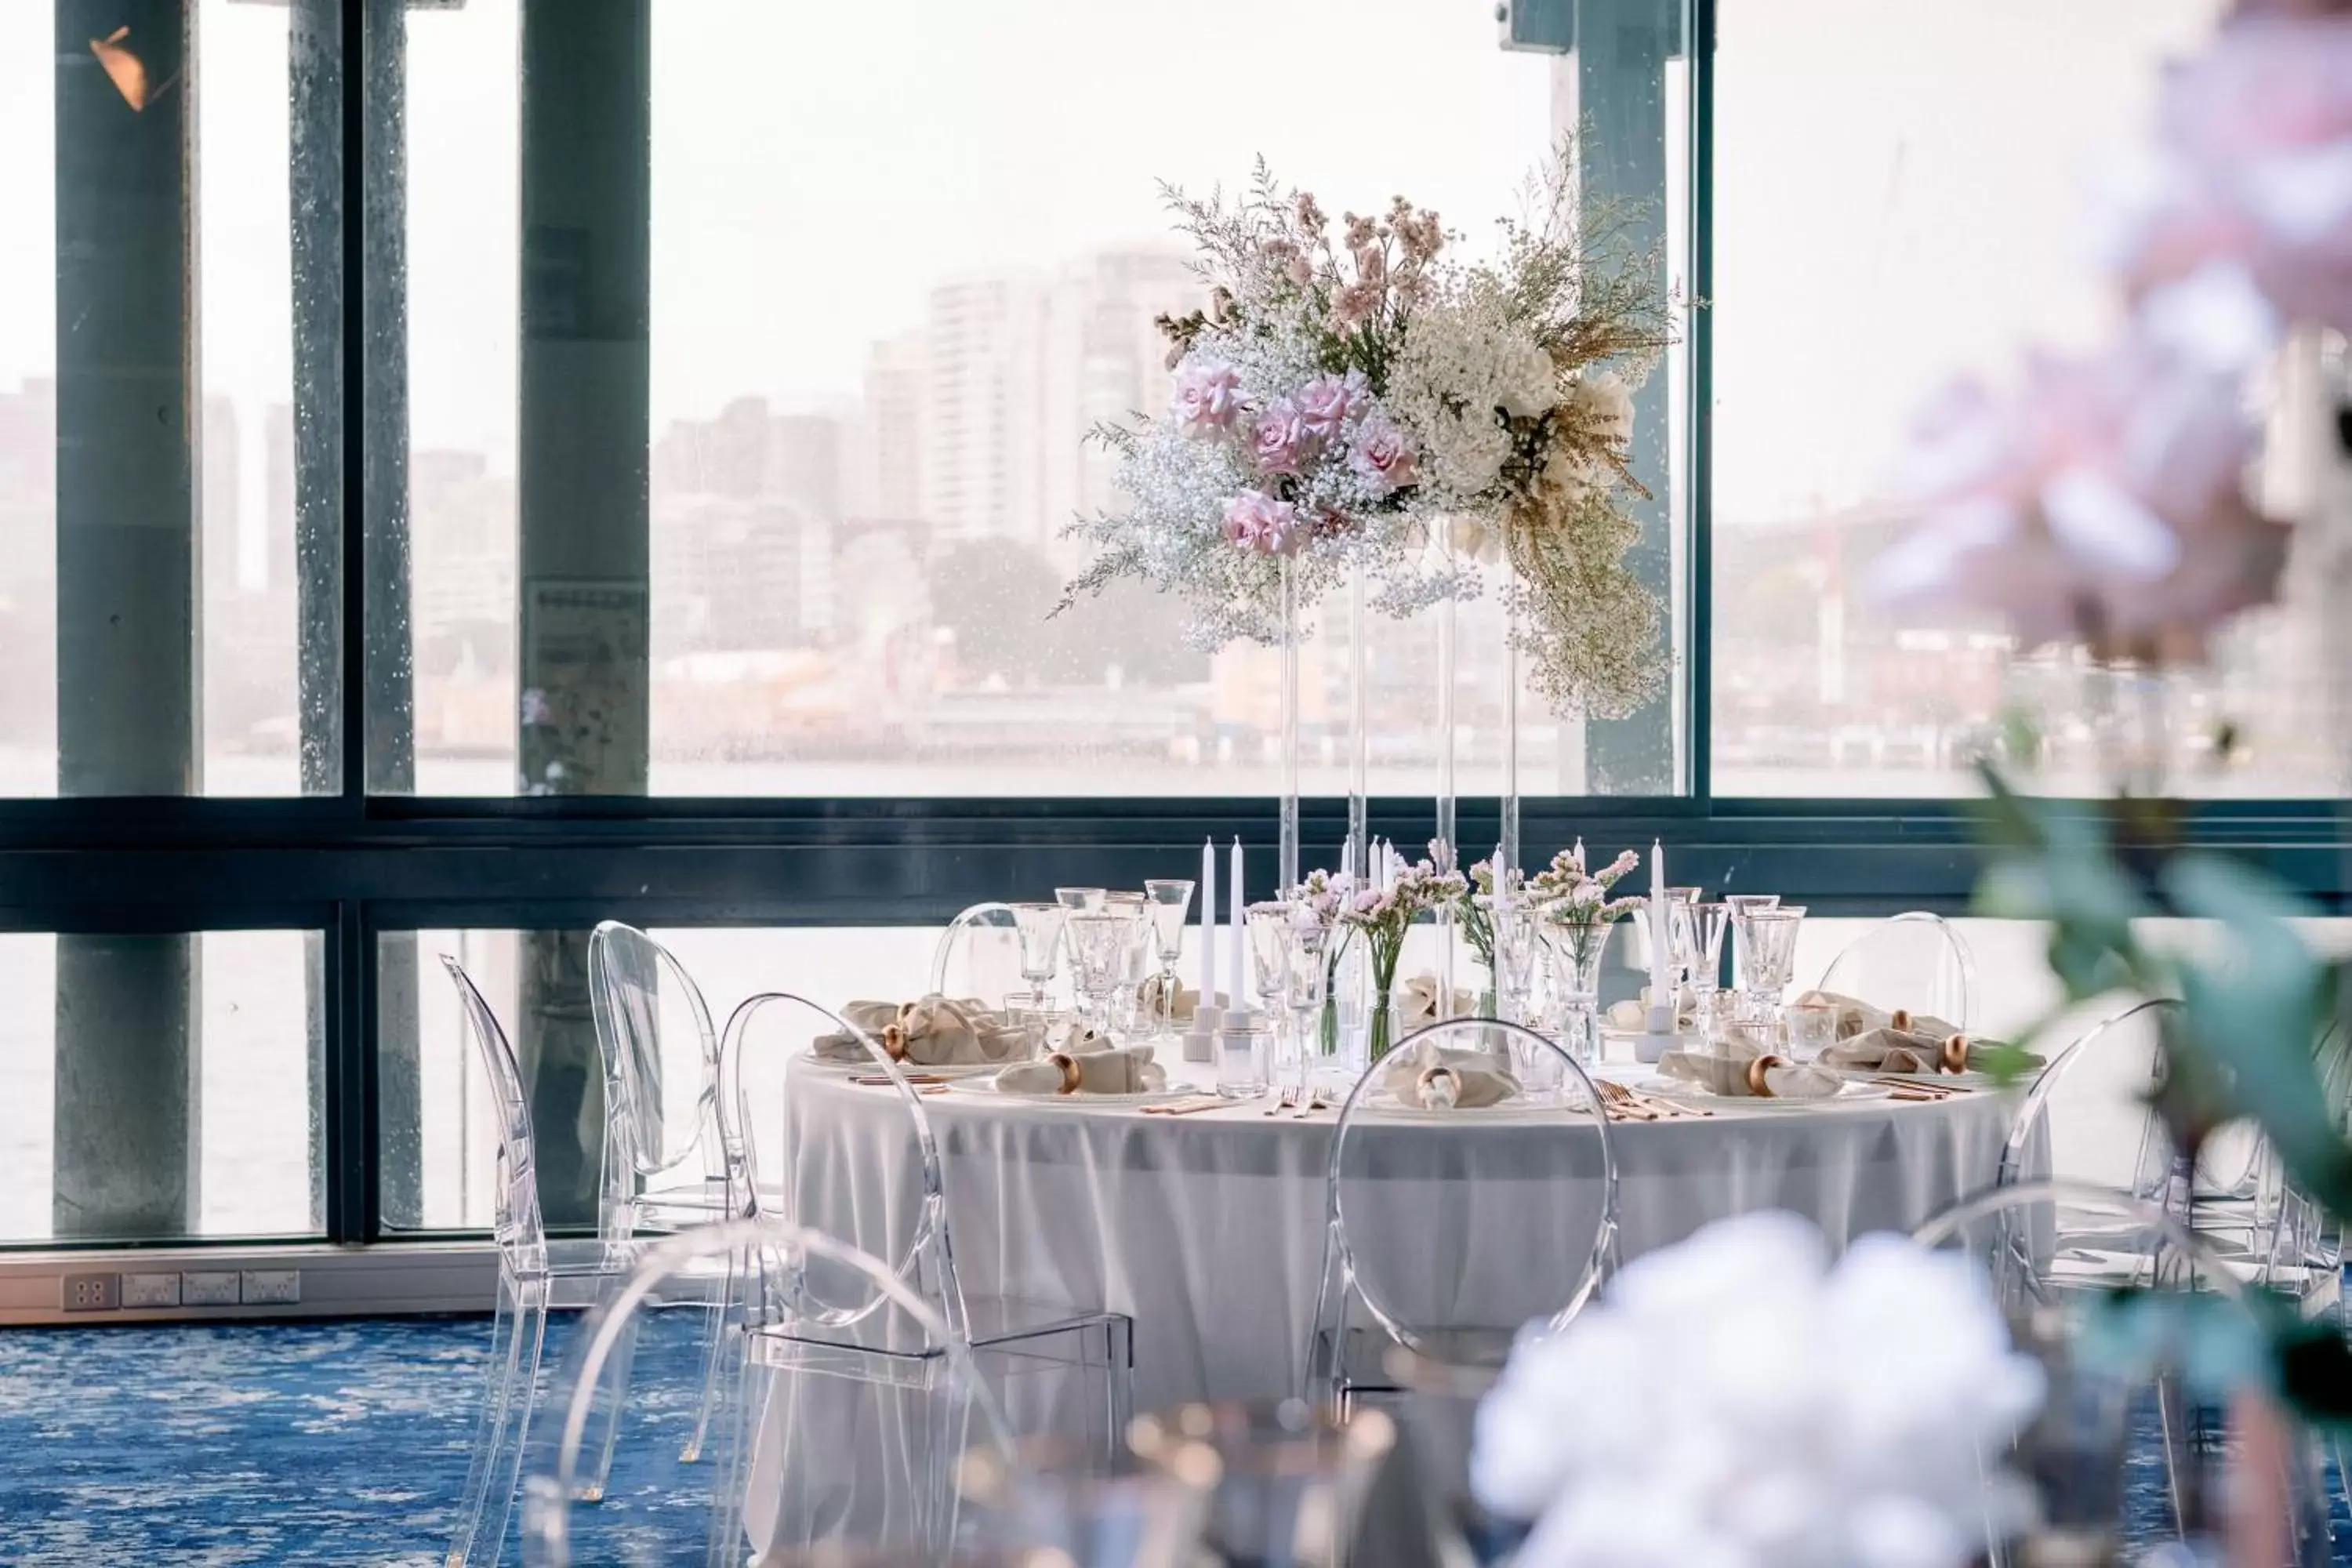 Banquet/Function facilities, Banquet Facilities in Pier One Sydney Harbour, Autograph Collection